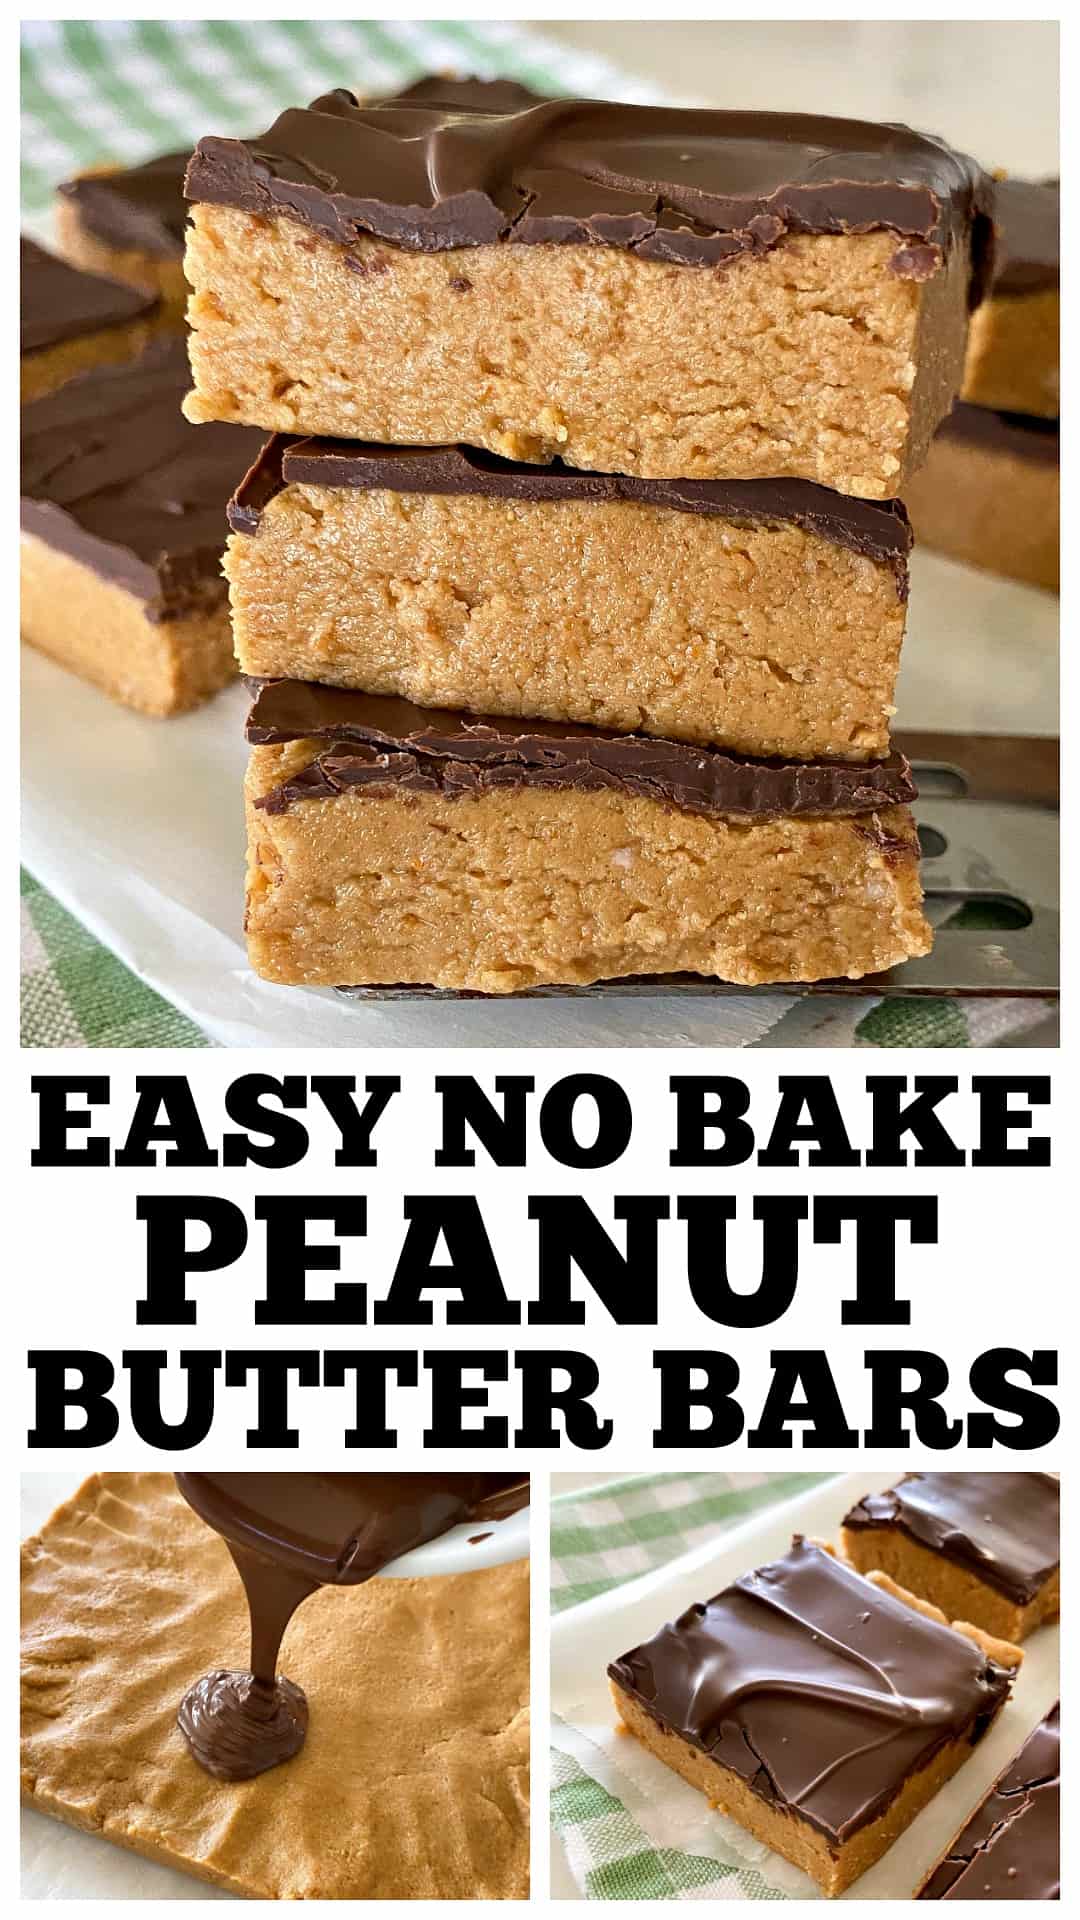 no bake peanut butter bars collage